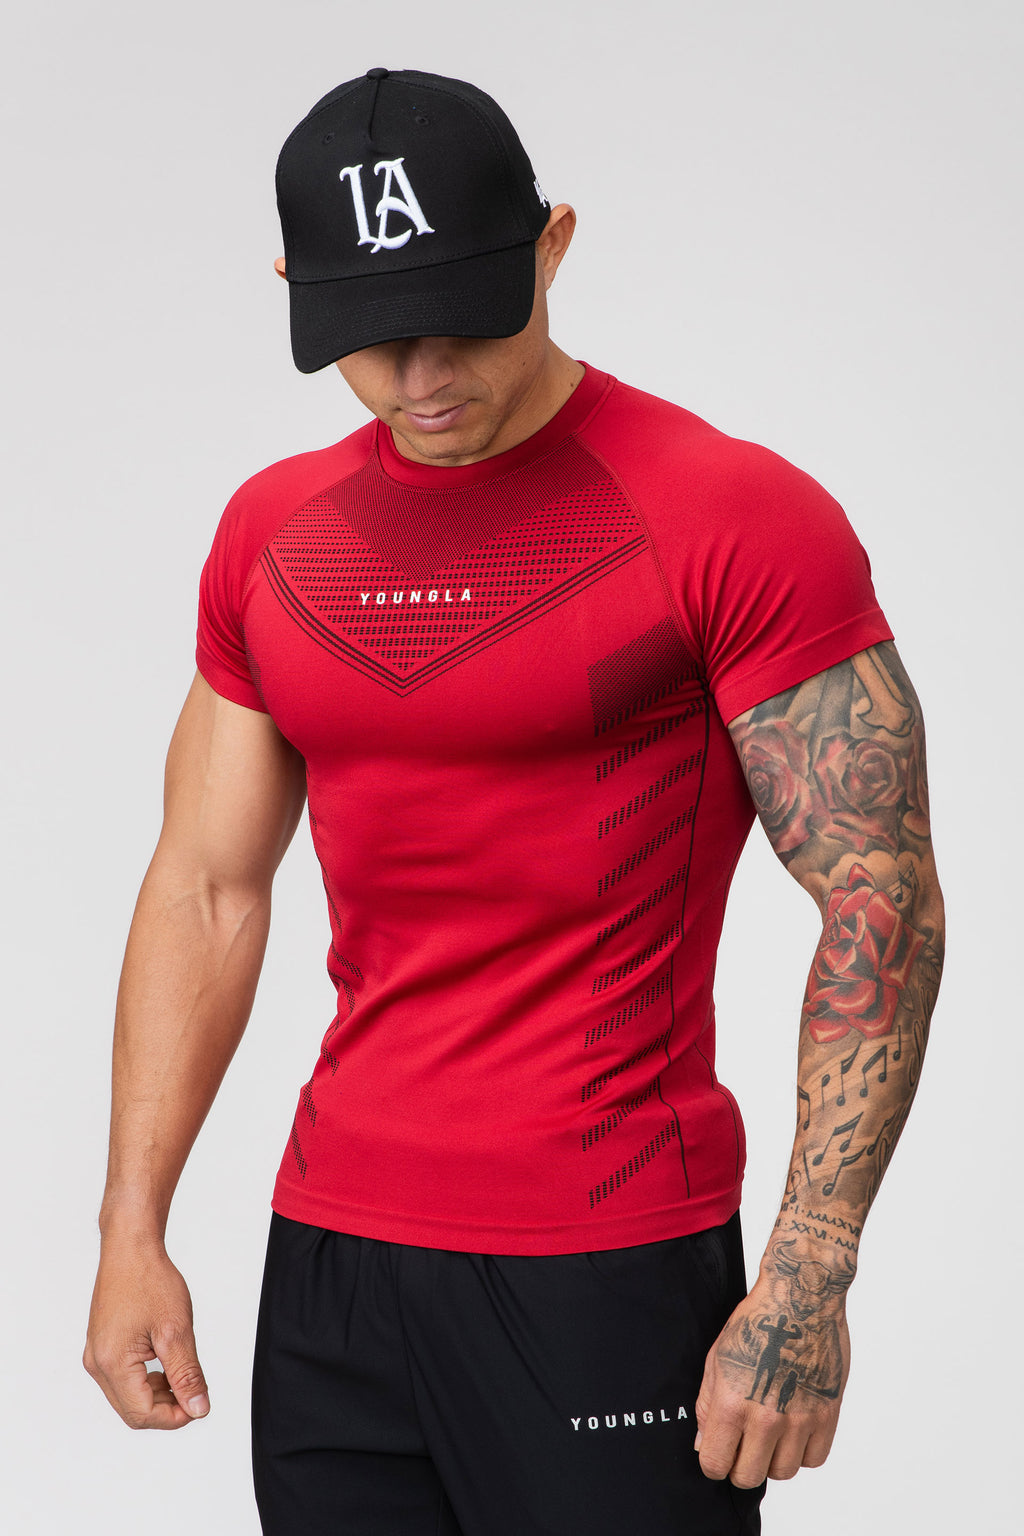 Short Sleeve Superhero Compression Shirts (X-Large) Red, Red, XL price in  Egypt,  Egypt